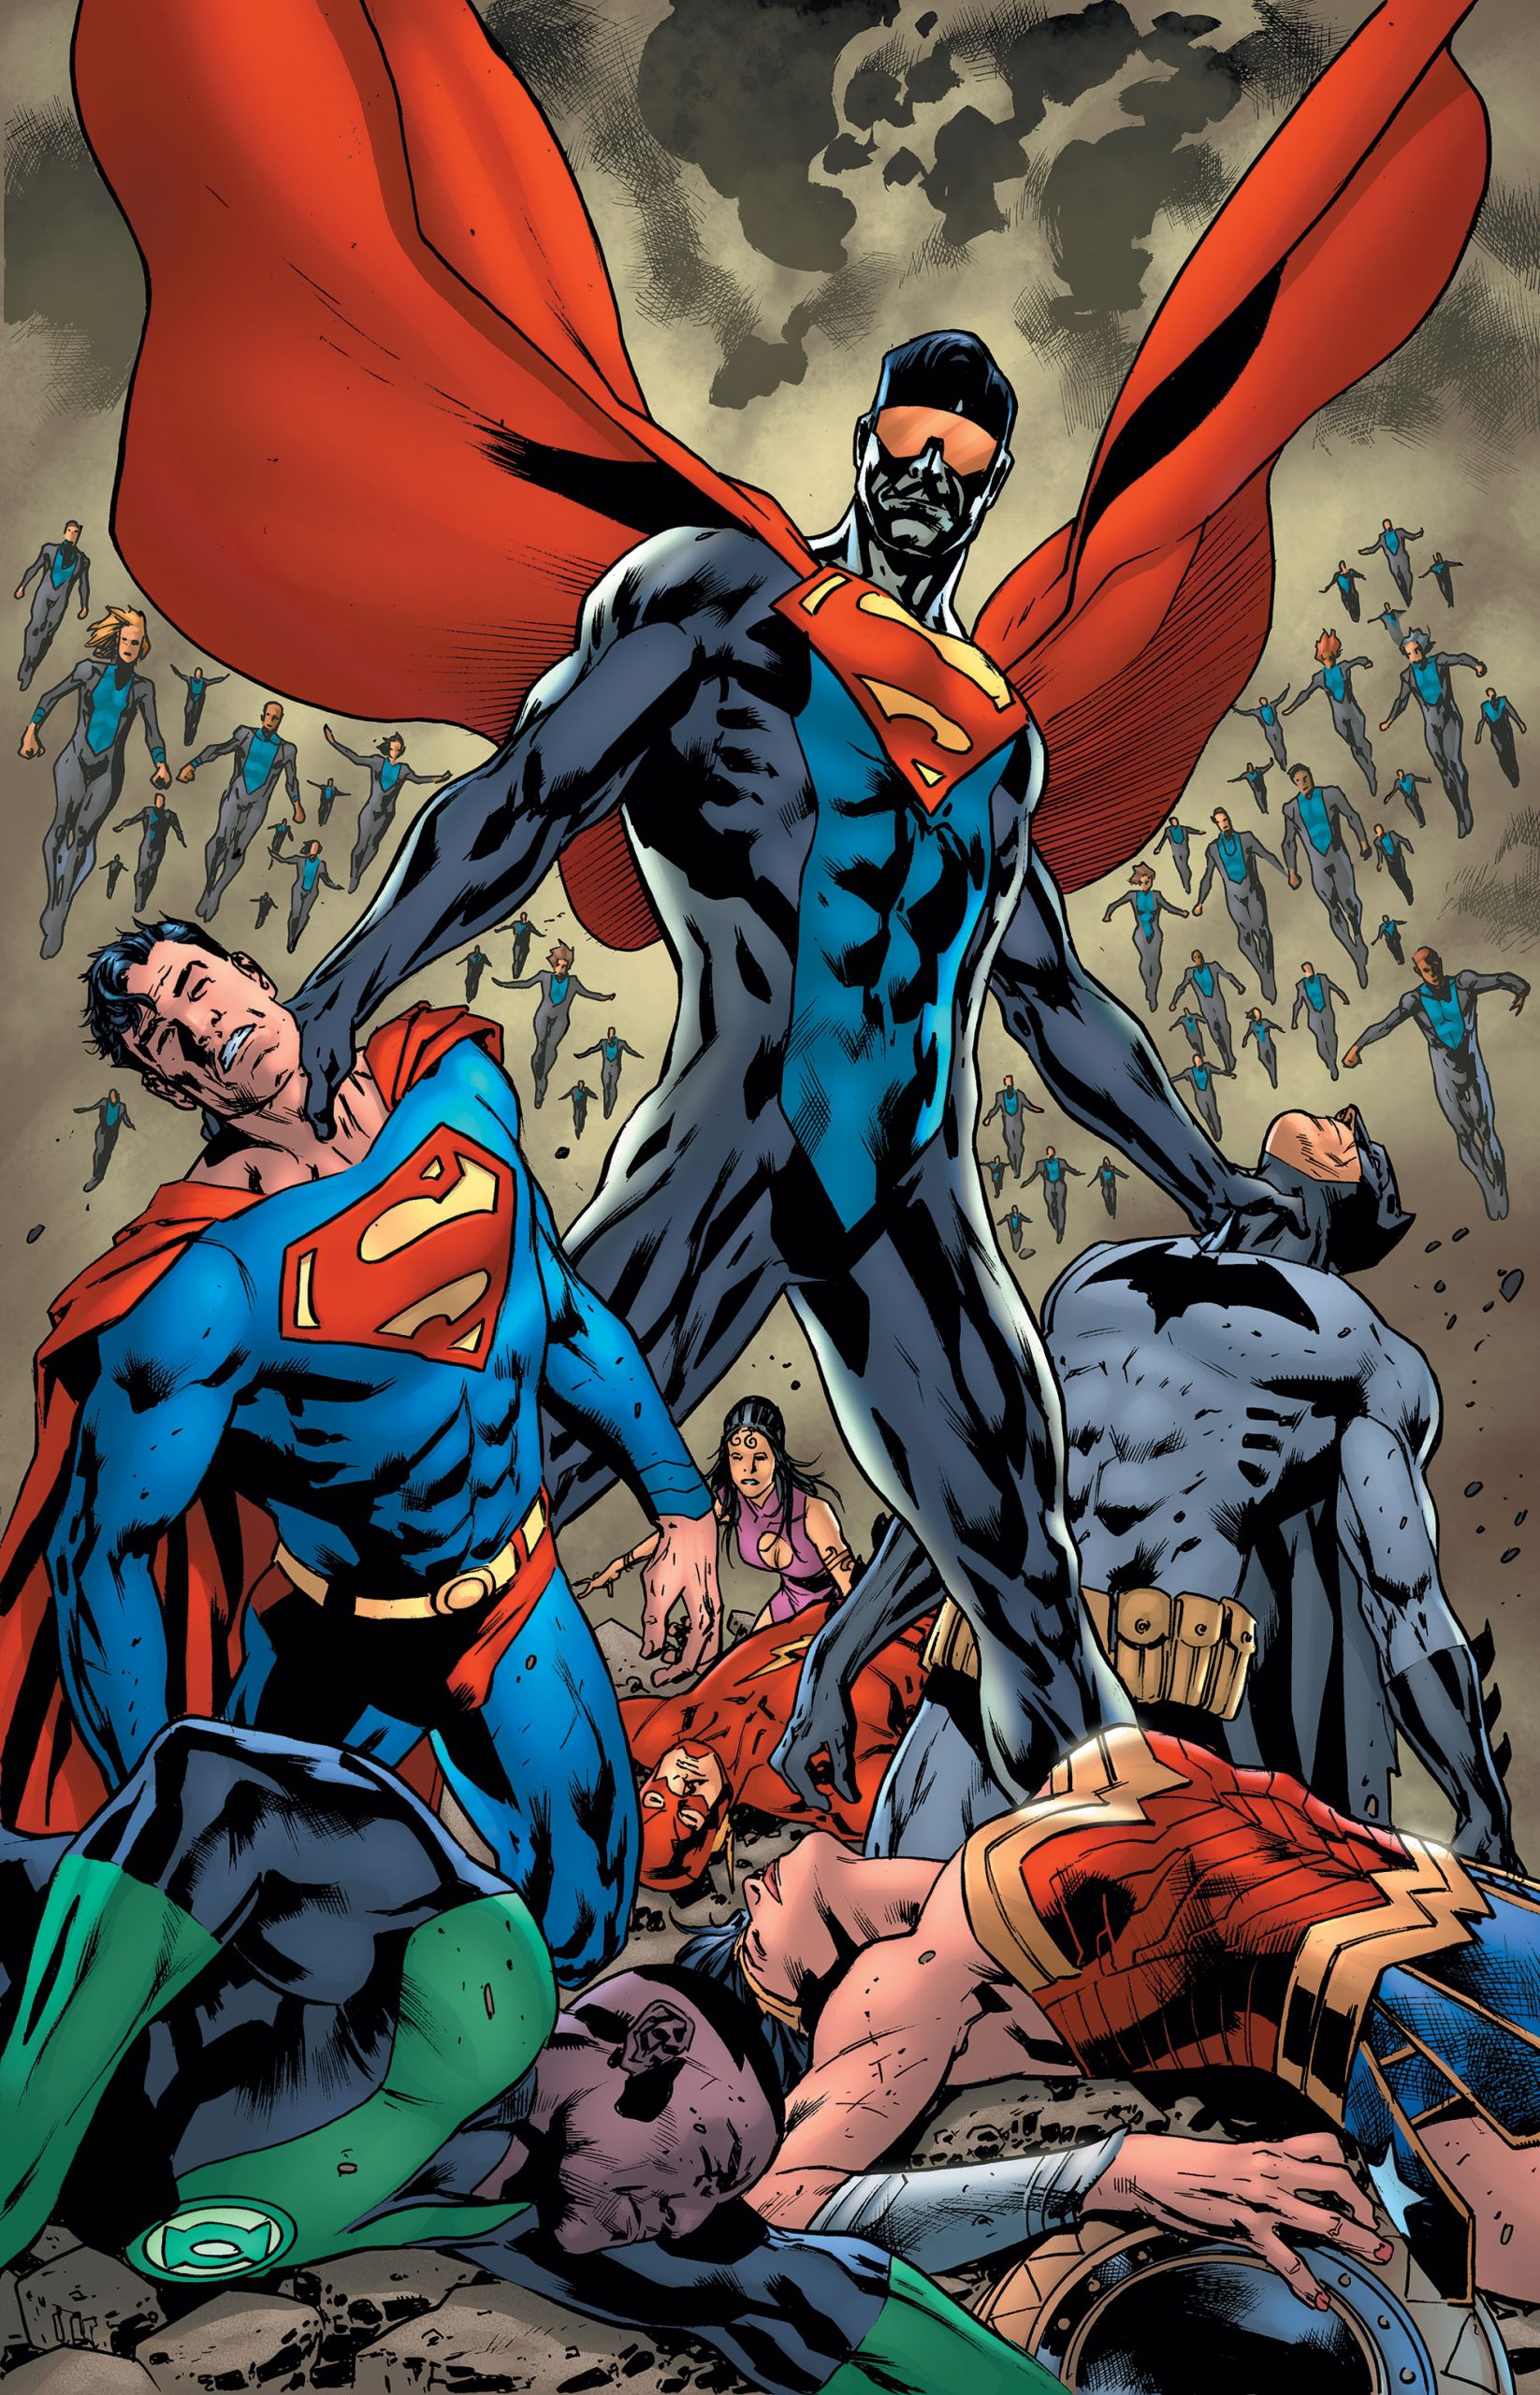 Justice League #41 Cover by Bryan Hitch